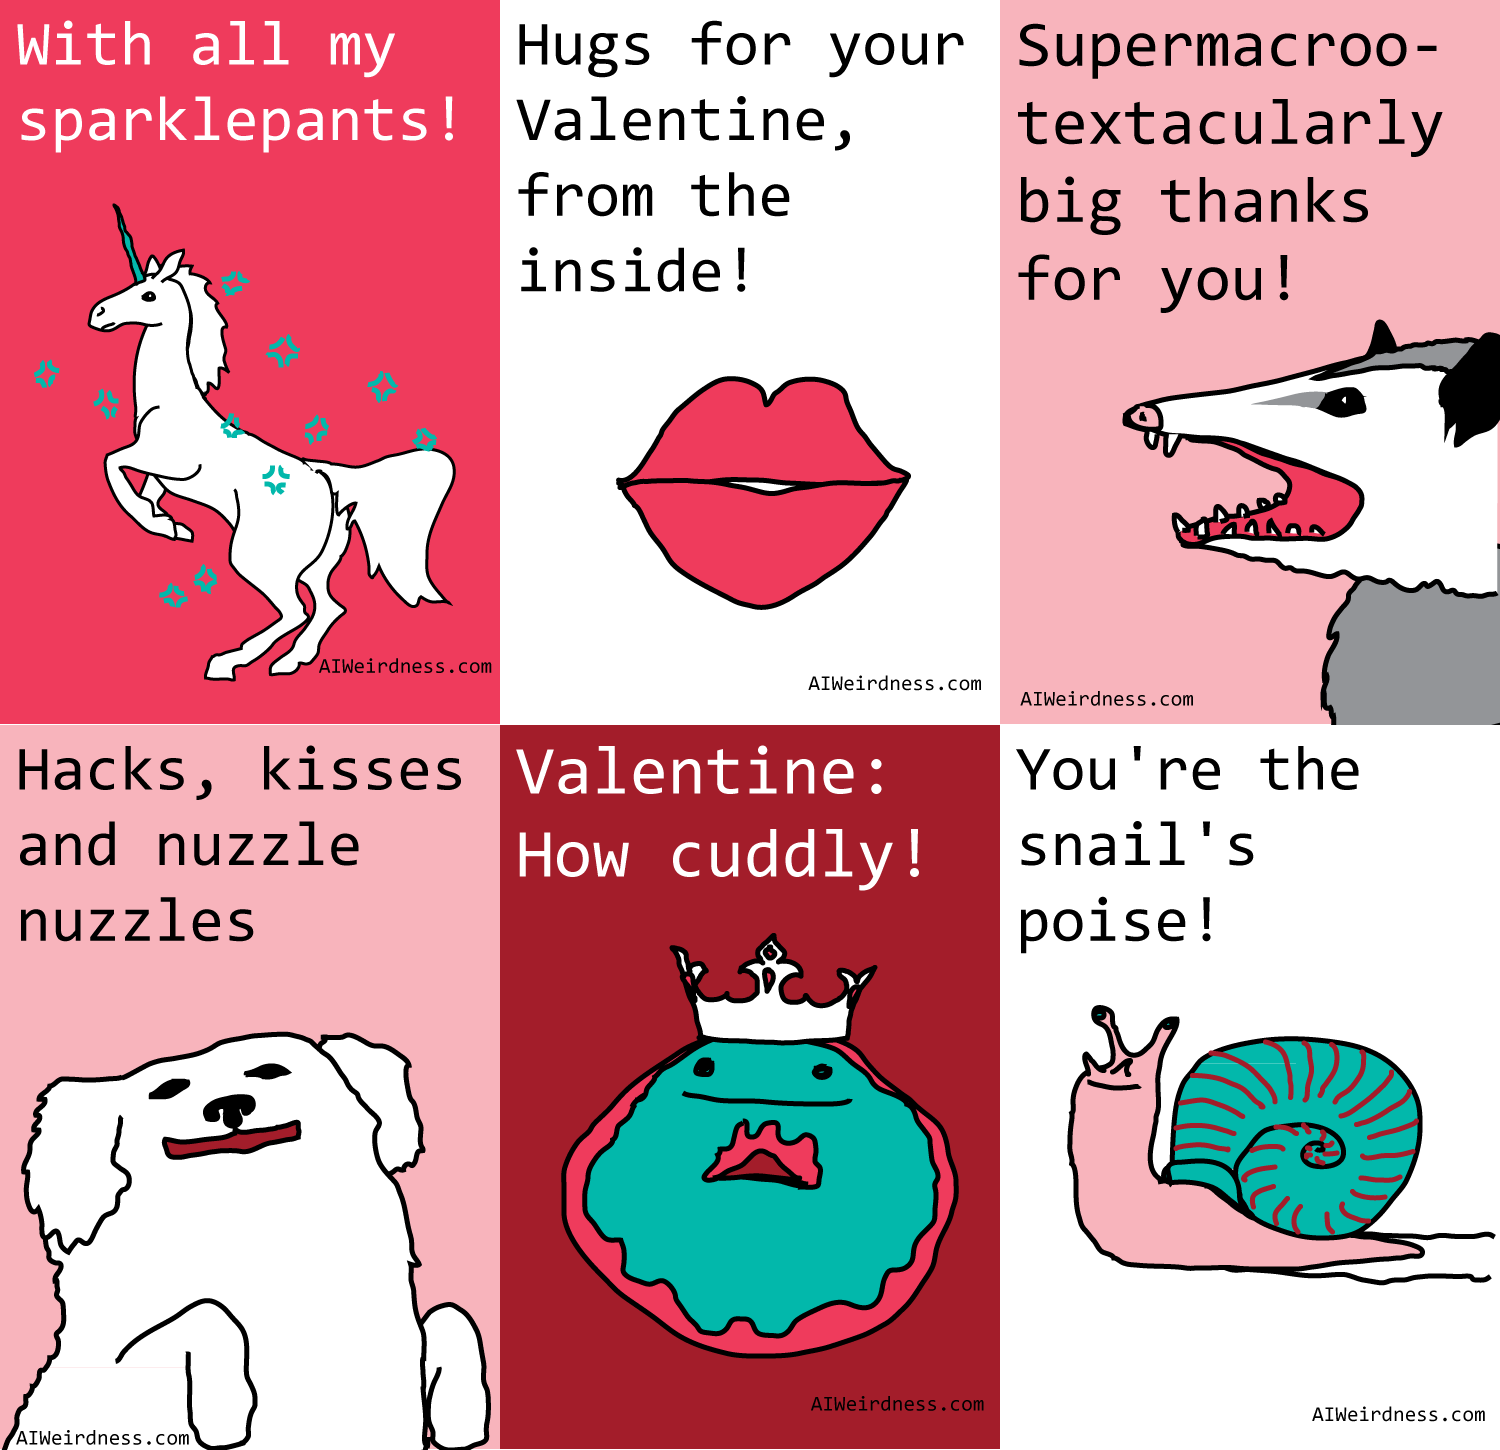 With all my sparklepants! - Image of a sparkly unicorn Hacks, kisses and nuzzle nuzzles - Image of a happy dog Hugs for your Valentine, from the inside! - Image of a pink heart-shaped mouth You're the snail's poise! - Image of a snail Valentine: How cuddly! - Image of a doughnut wearing a crown Supermacrootextacularly big thanks for you! - Image of a tenacious opossum